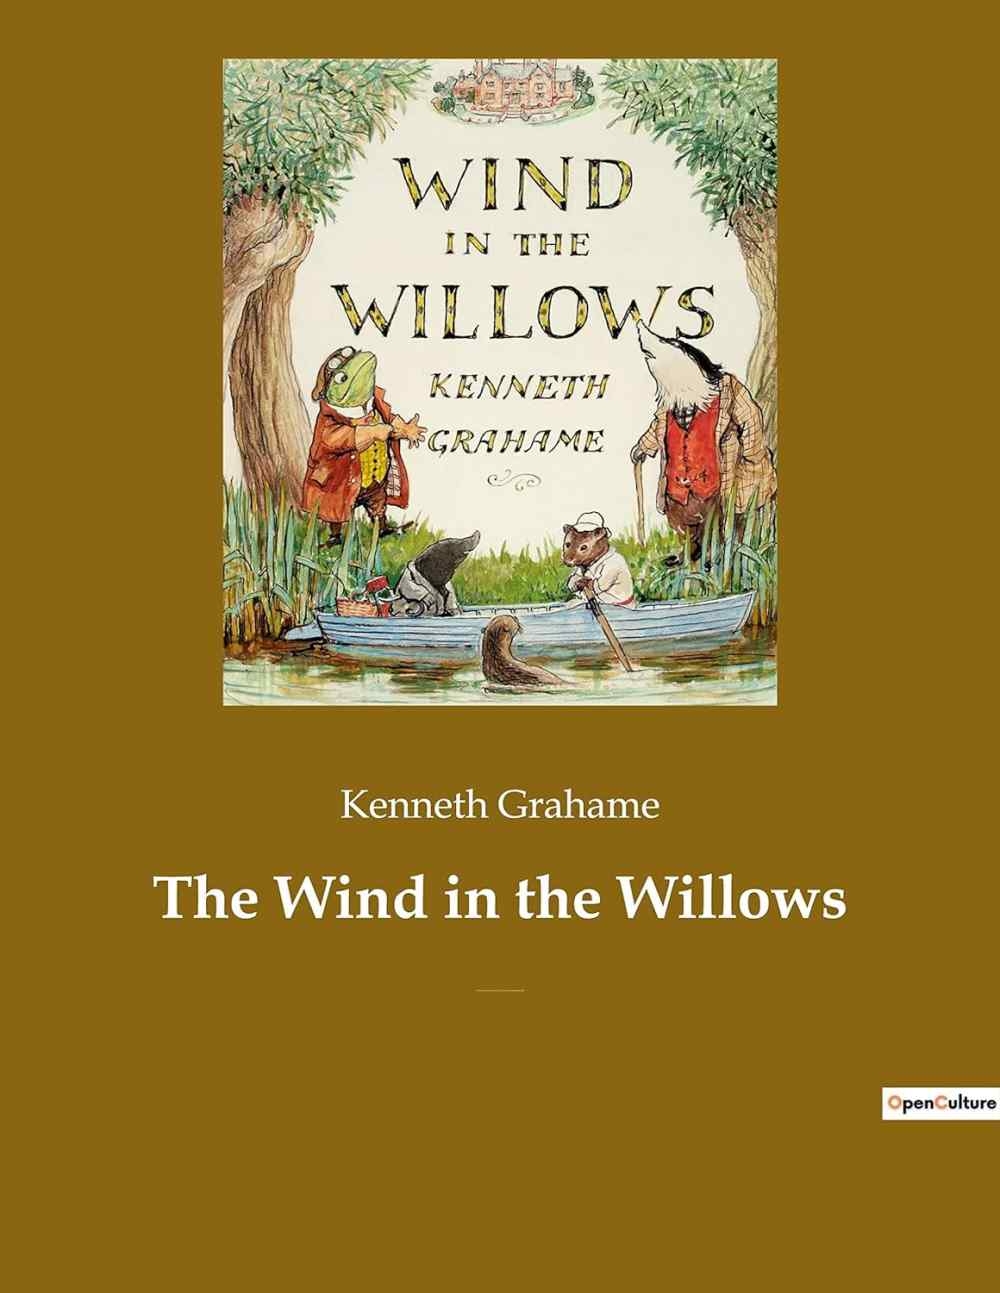 The Wind in the Willows: A children’s book by the British novelist Kenneth Grahame, focusing on four anthropomorphised animals